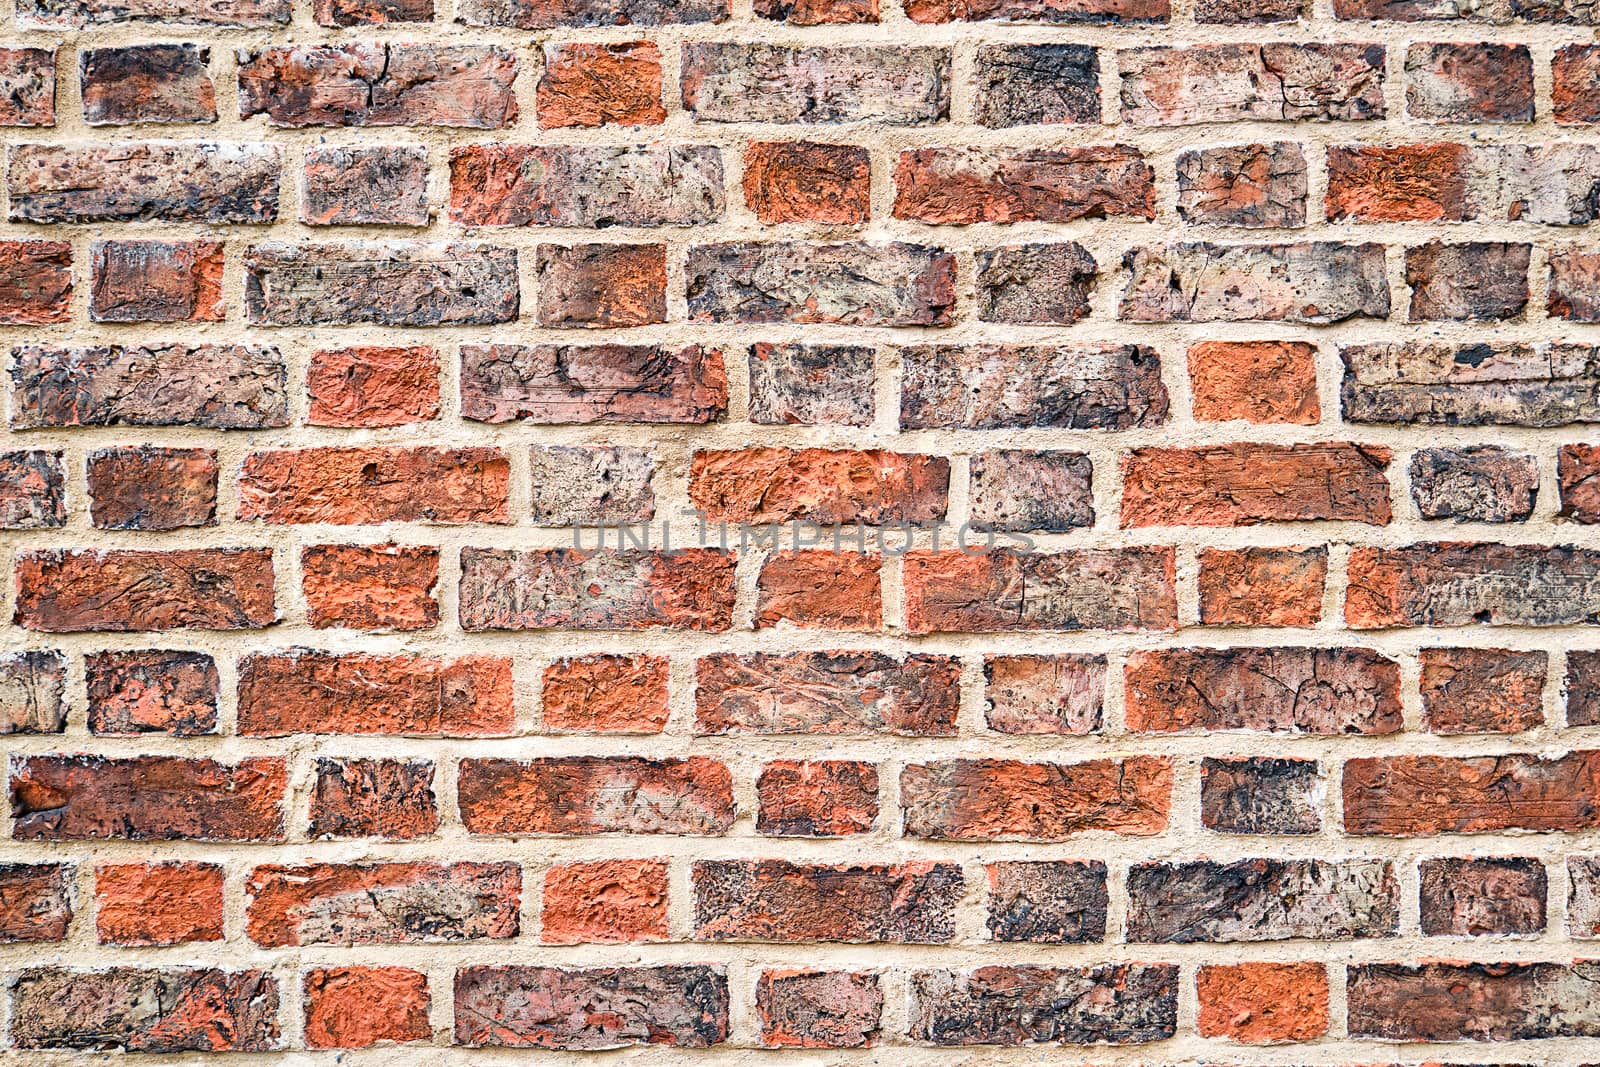 Background from an old and rugged brick wall